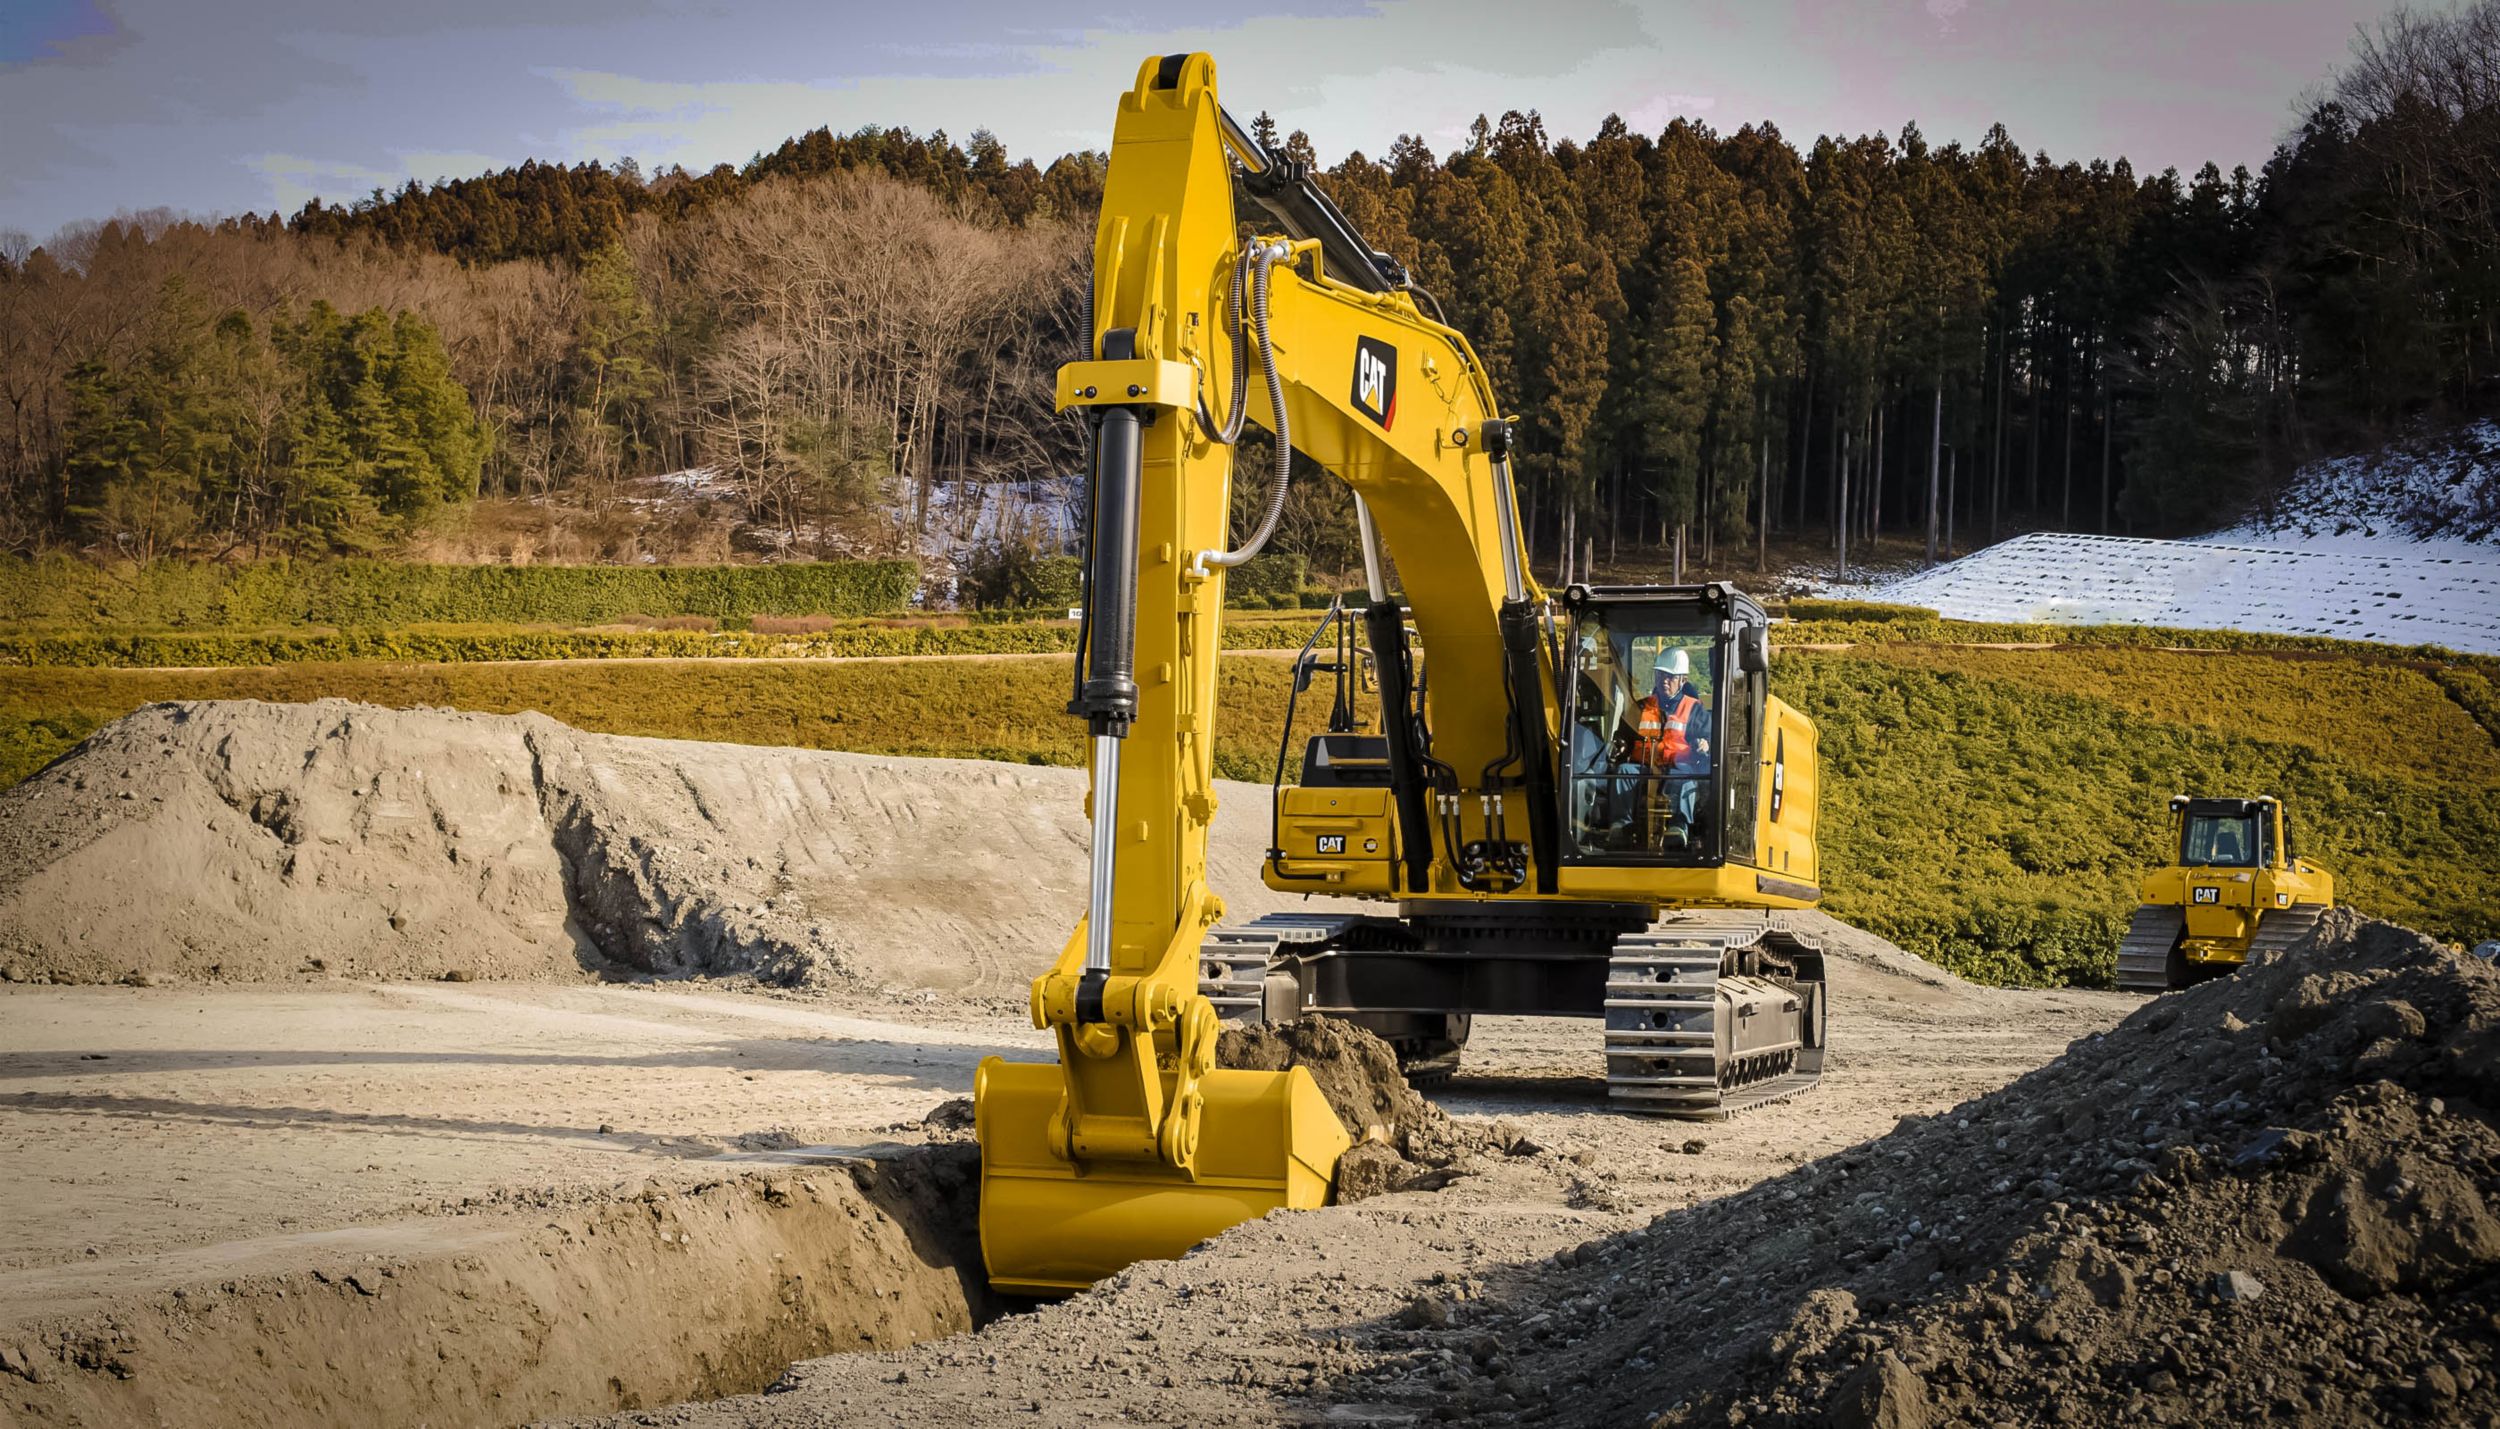 340 Hydraulic Excavator digging trench in rocky soil